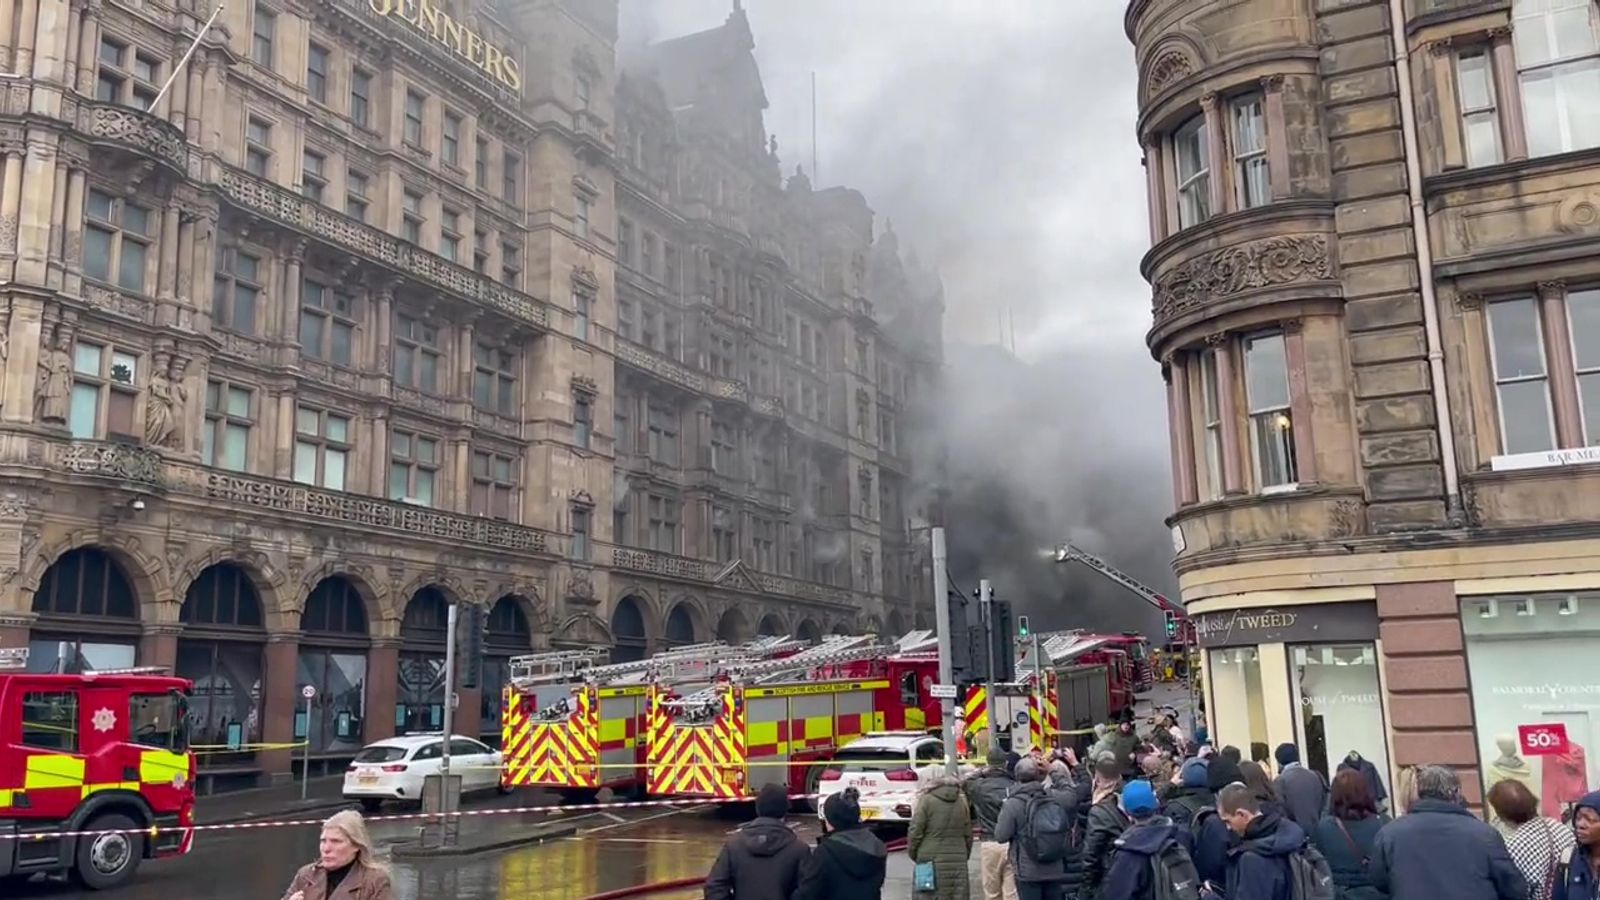 Cause of Jenners fire in Edinburgh still 'unknown' - with emergency crews remaining at scene and firefighter in 'critical condition'